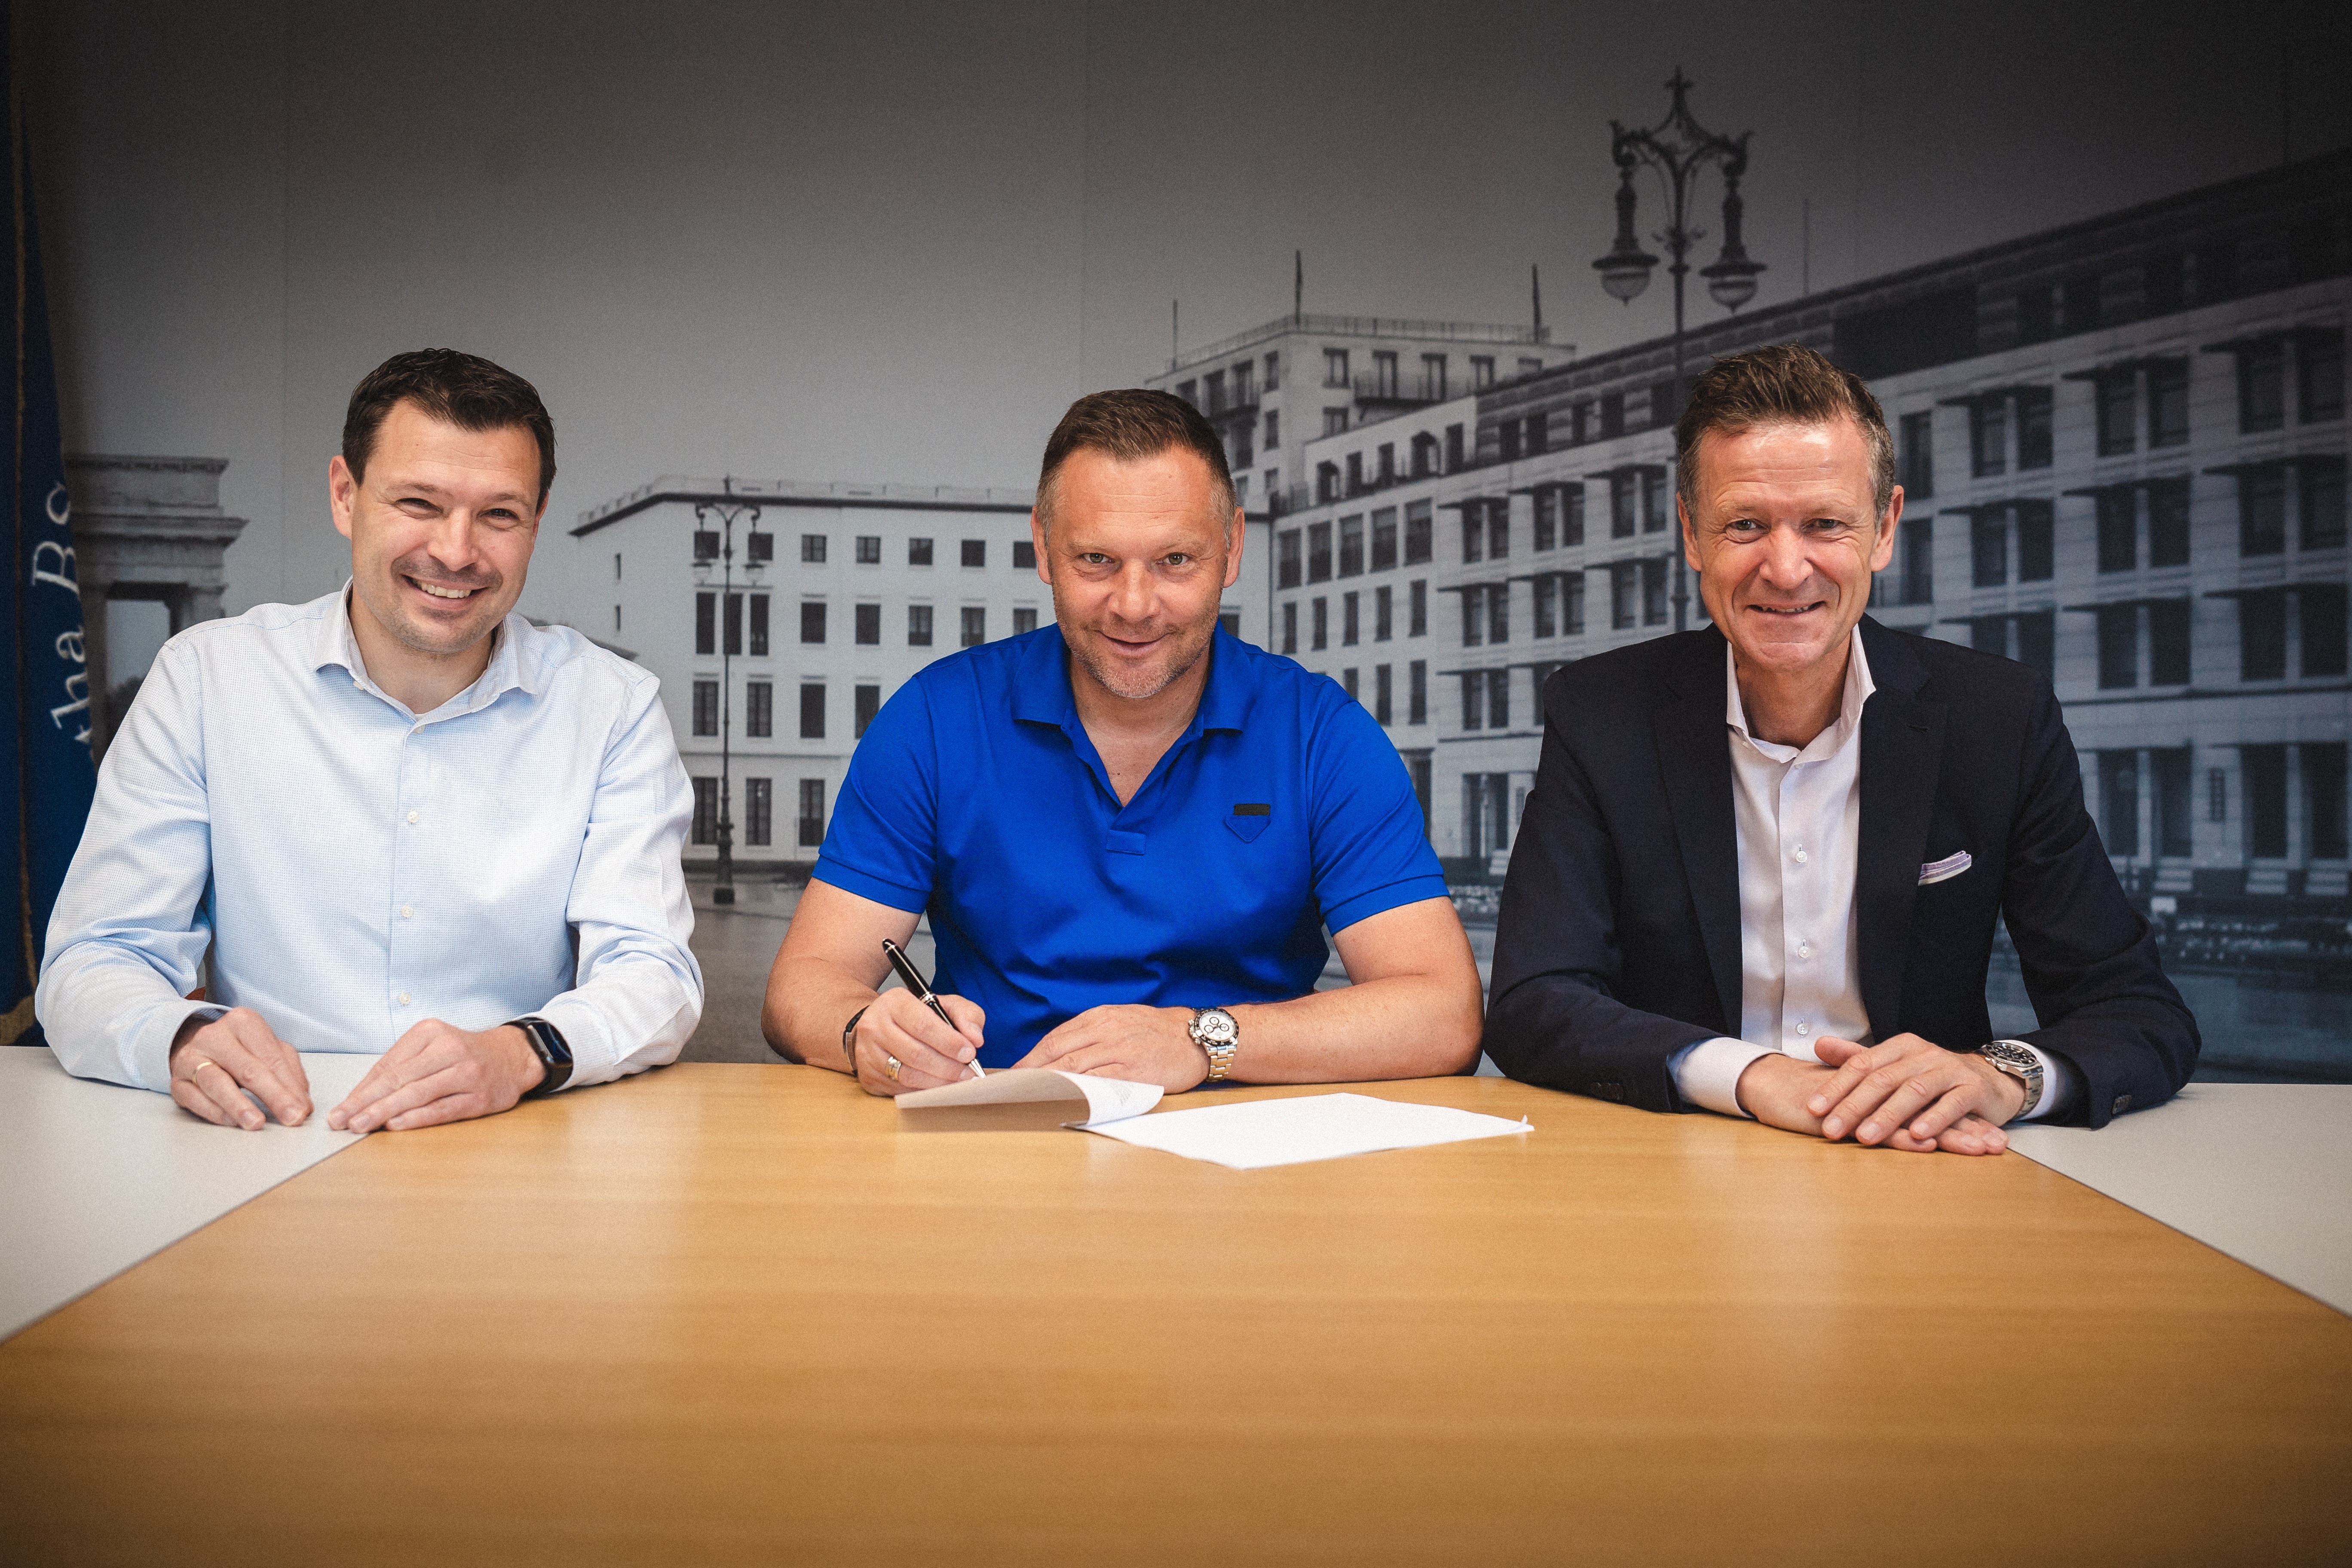 Benjamin Weber, Pál Dárdai and Thomas E. Herrich sitting at the table for the contract signing.